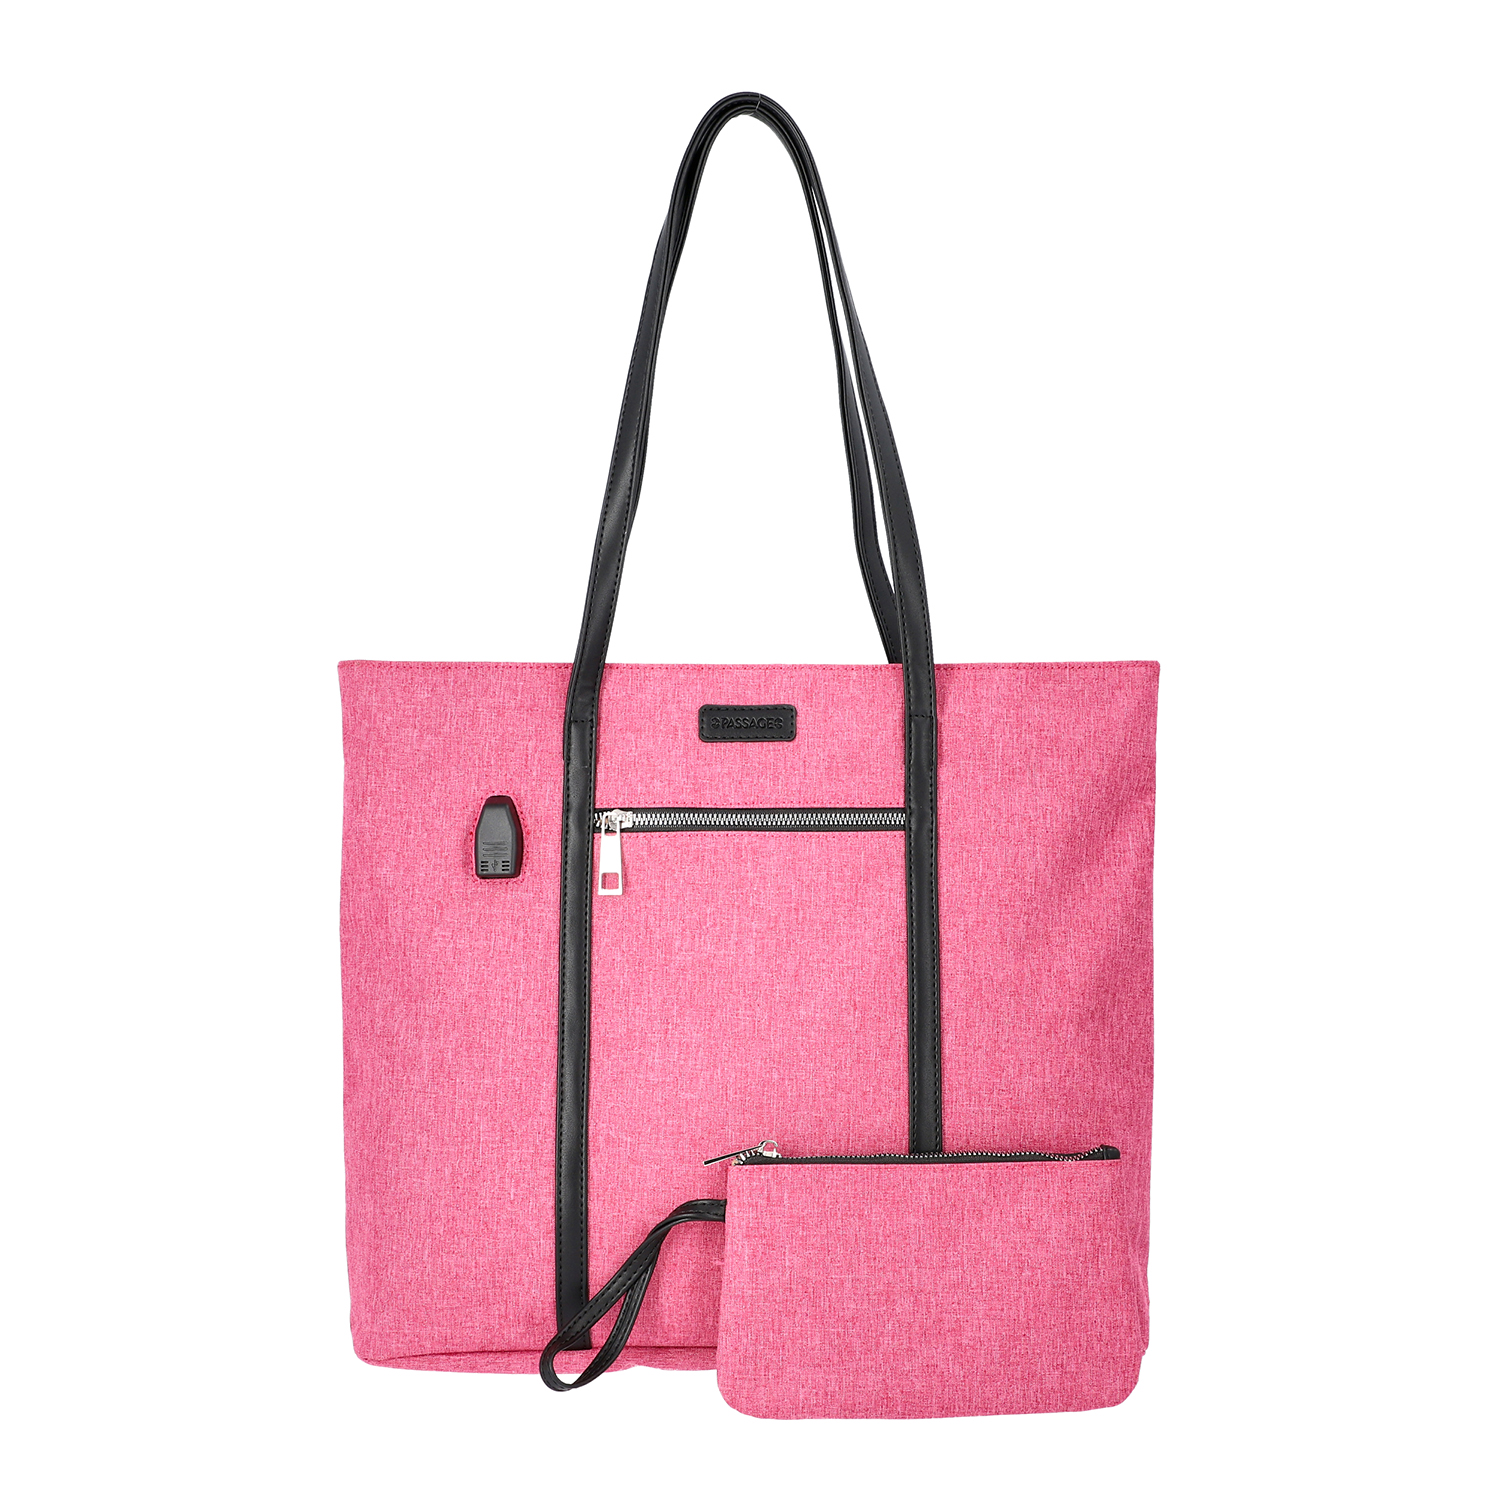 Multi Purpose Zipper Closure Tote Bag (40x13x35cm) with Wristlet (20x12cm) and Power Bank - Pink